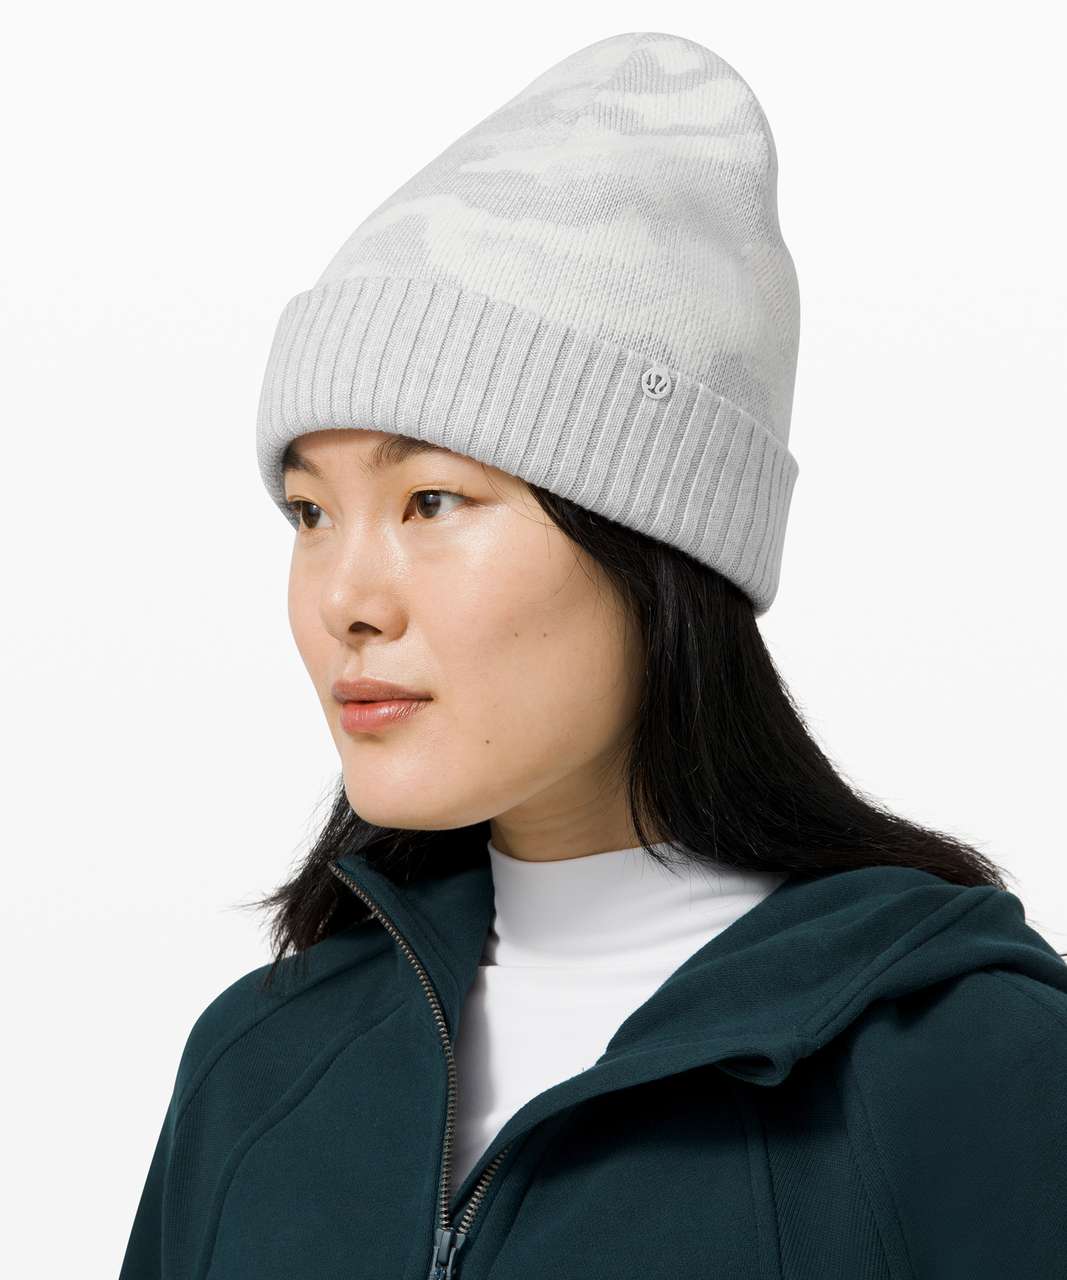 Lululemon Room for Warmth Beanie - Heathered Core Ultra Light Grey ...